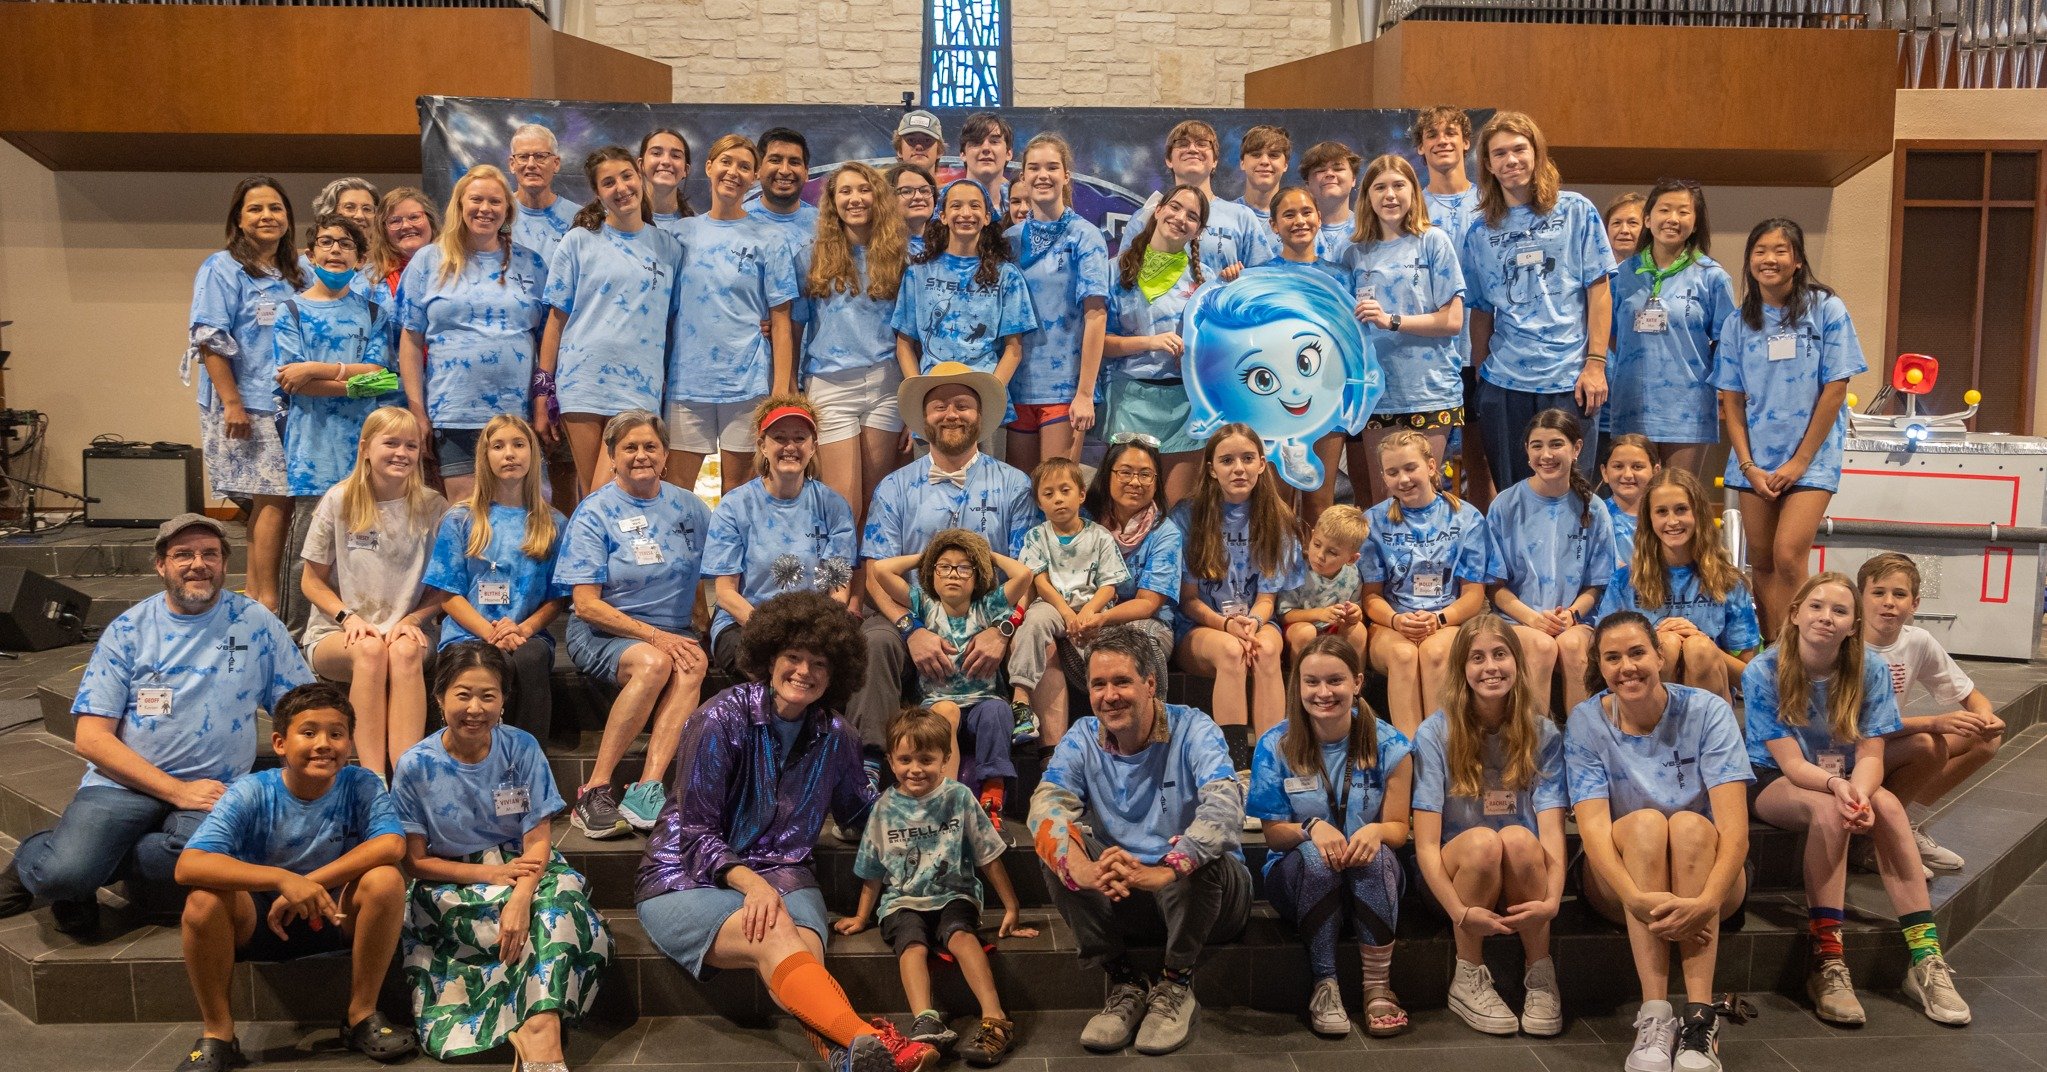 🎉 Let's Start the Party this summer with VBS! 🎉 Last year's Vacation Bible School was an absolute blast, and we've got the photos to prove it! We're gearing up for another incredible four days of God-centered FUN, with games, songs, crafts, and lea